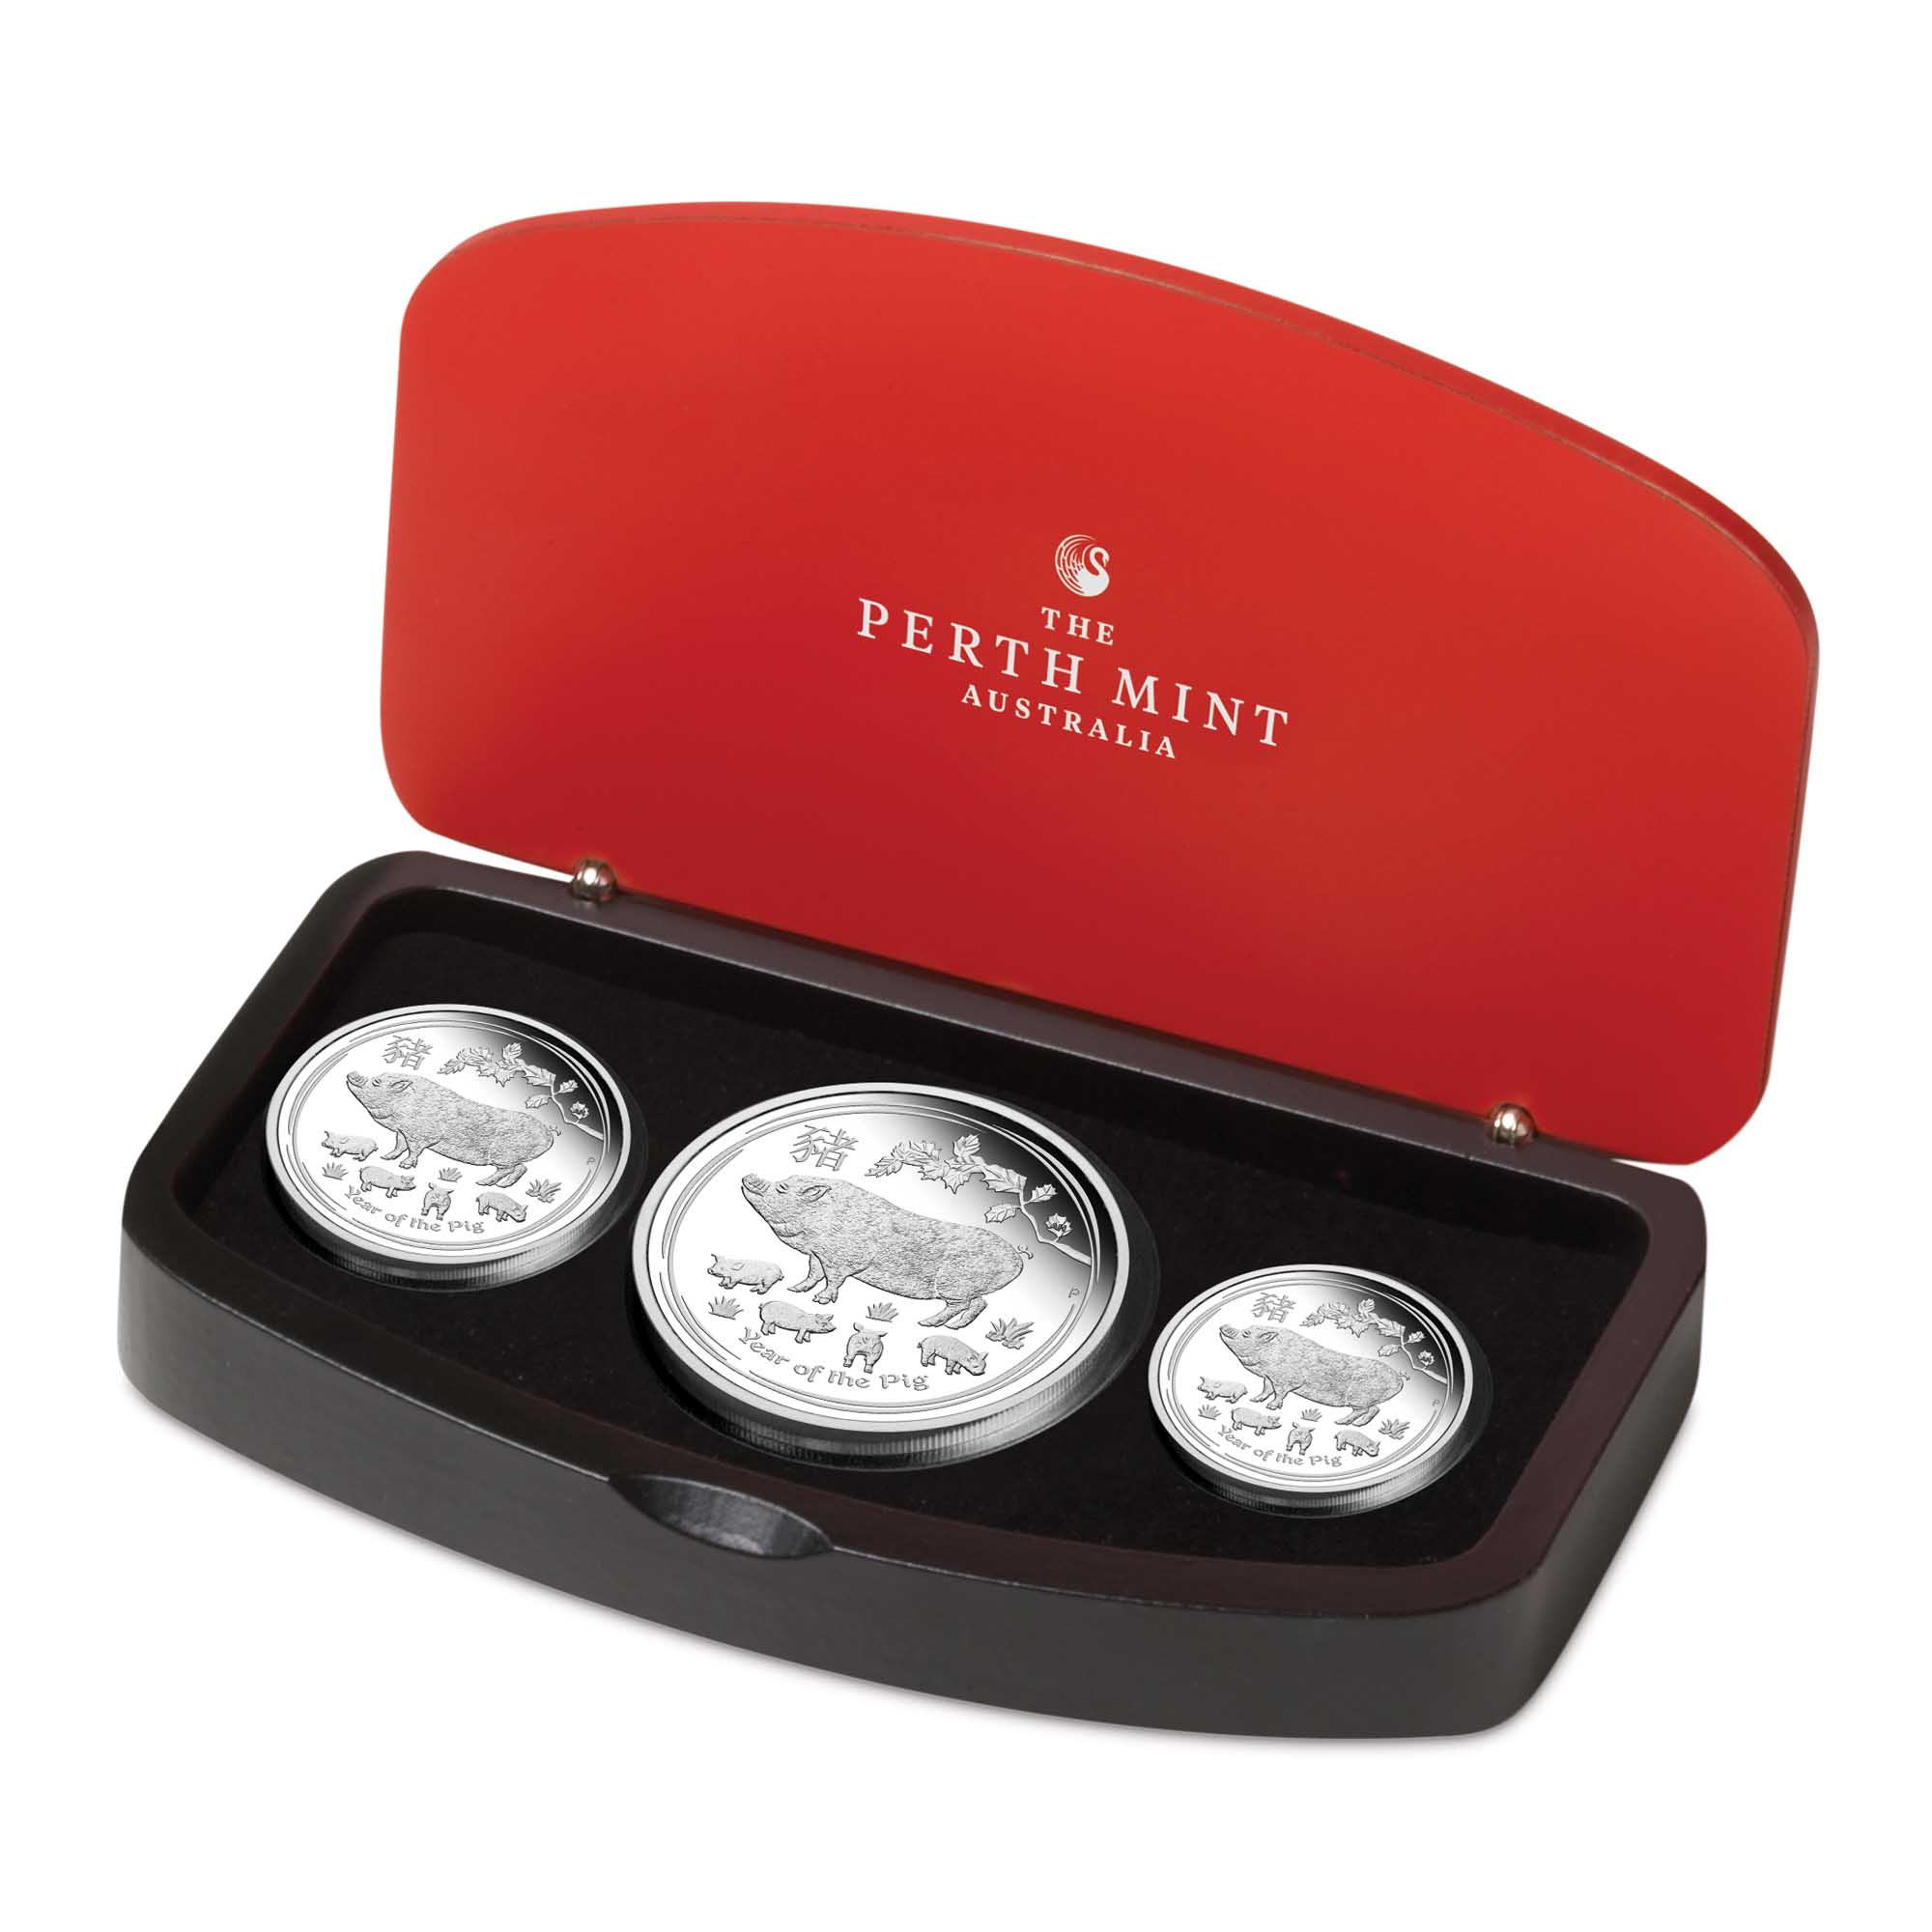 Our Wedding Year Coin Gift Set 2019 